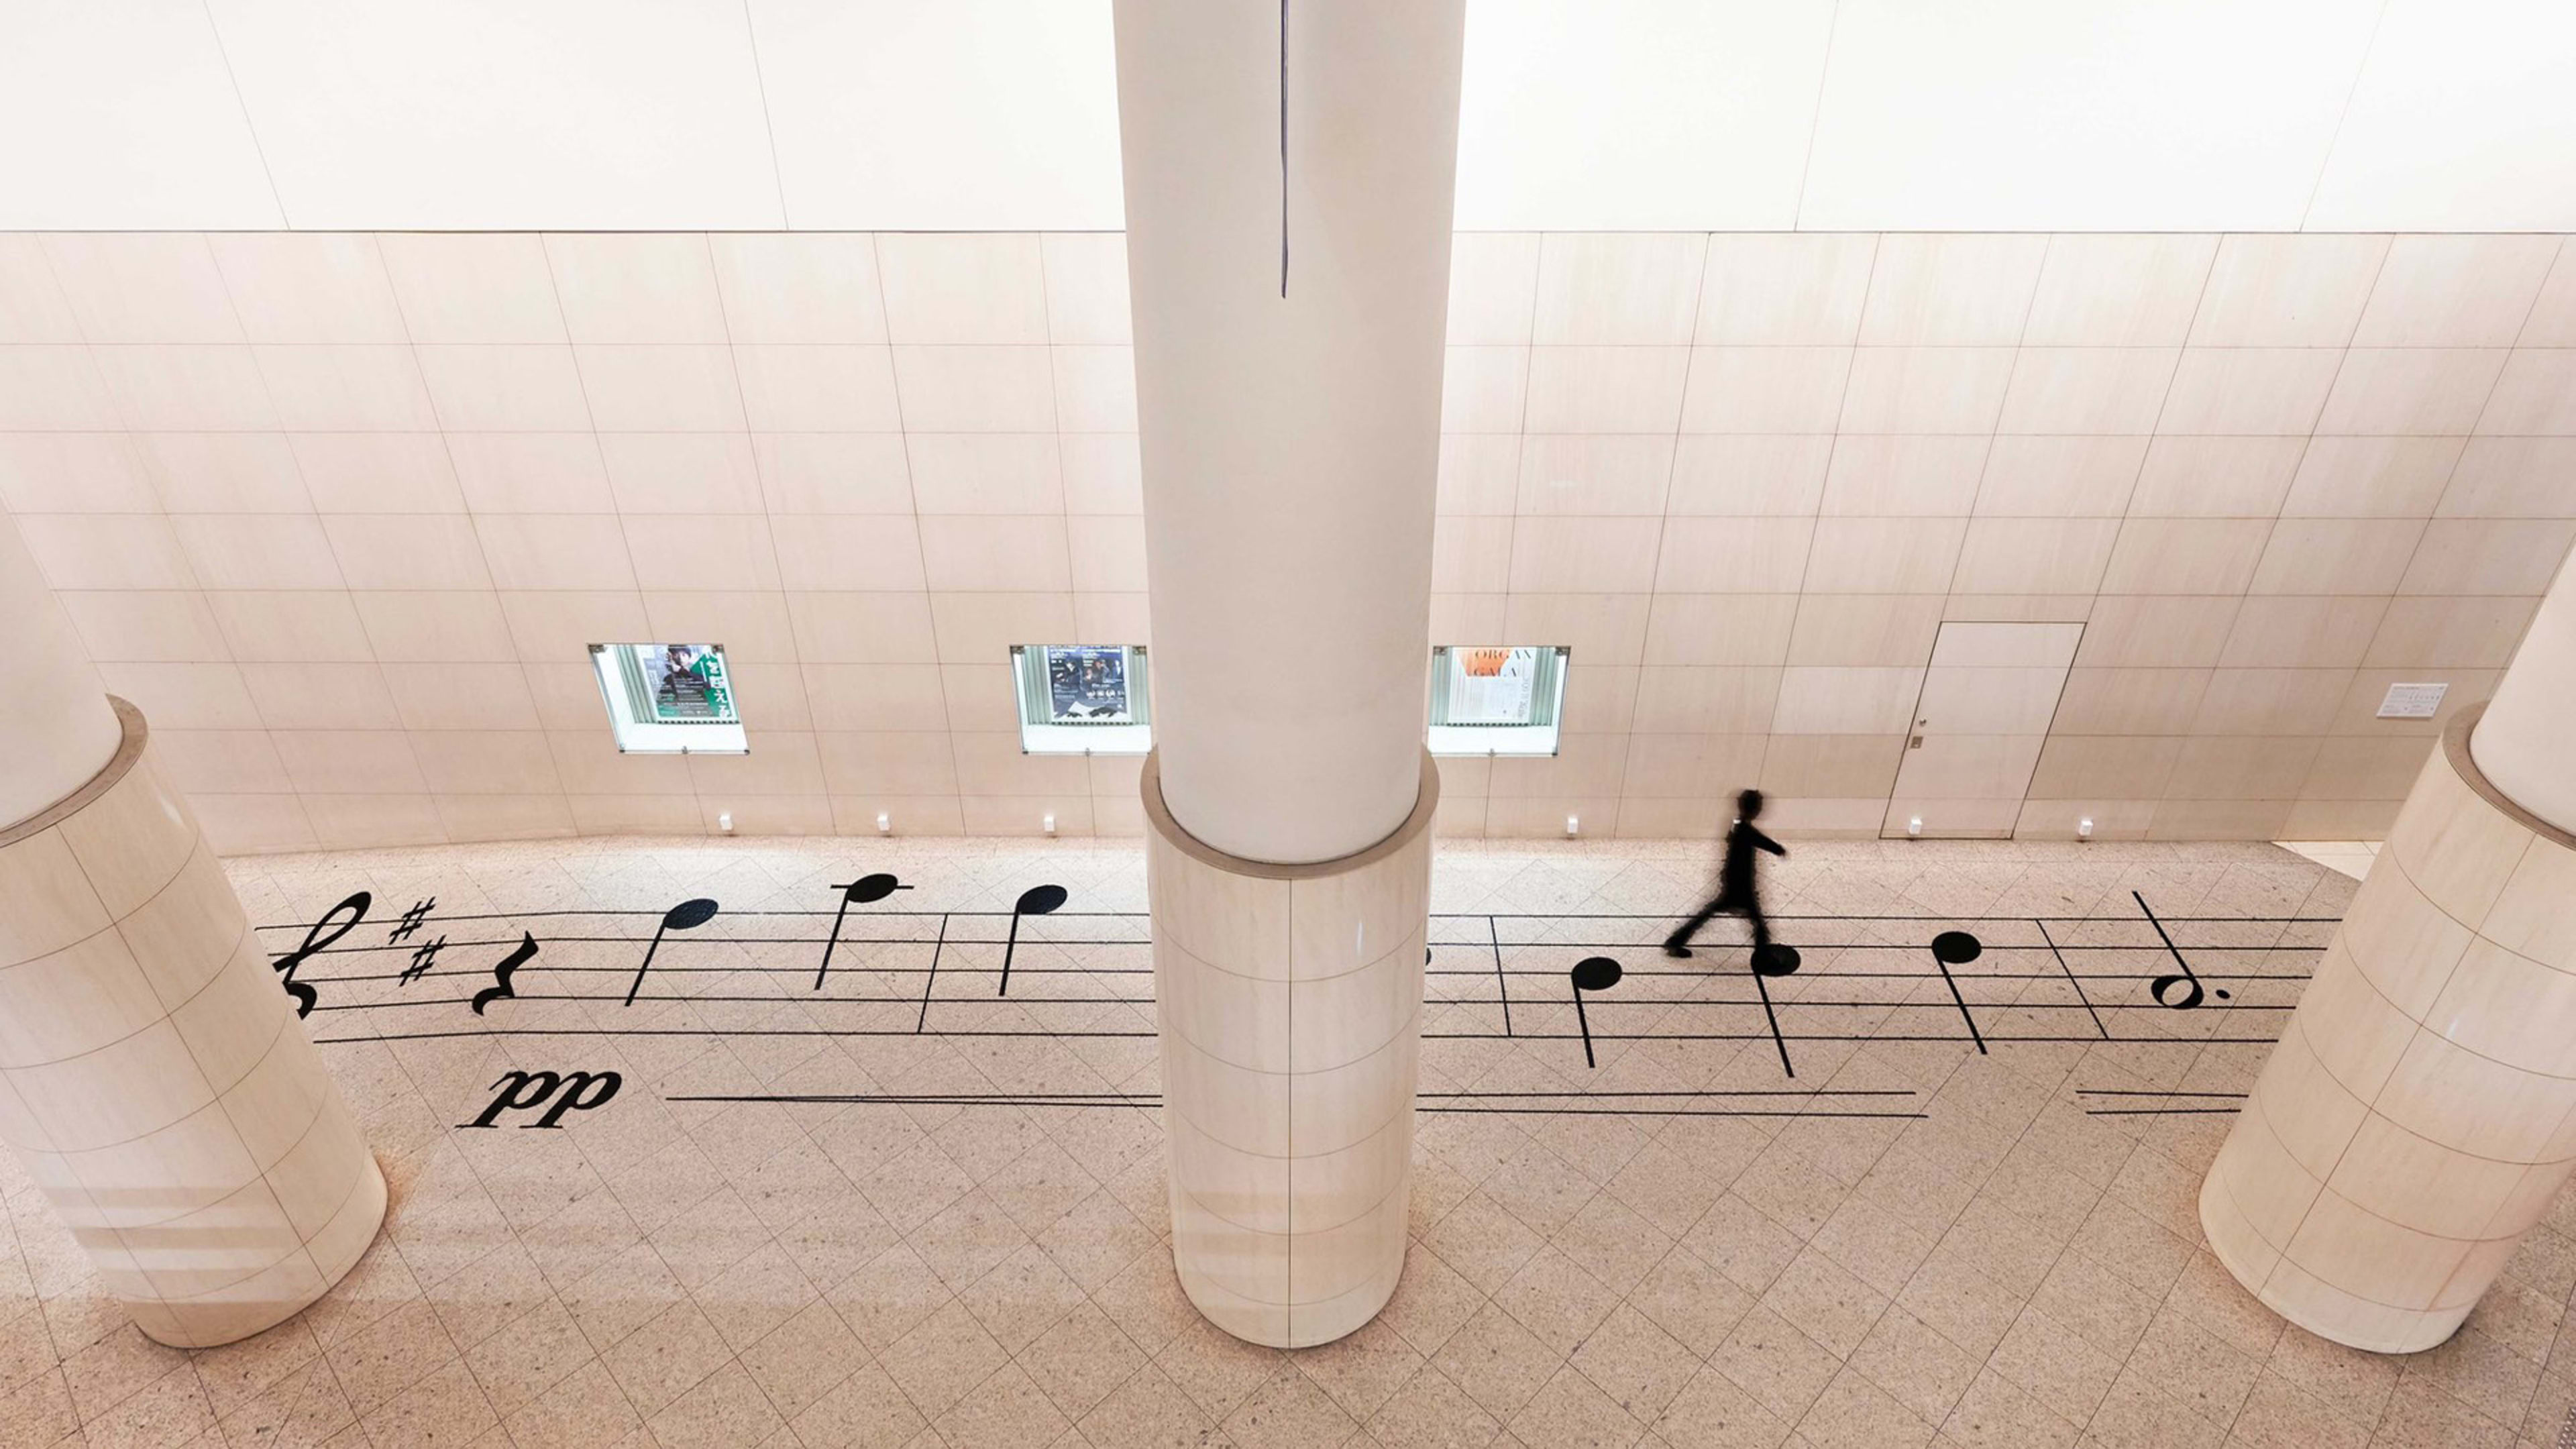 This new installation reimagines the iconic piano scene in ‘Big’ for the socially distant era